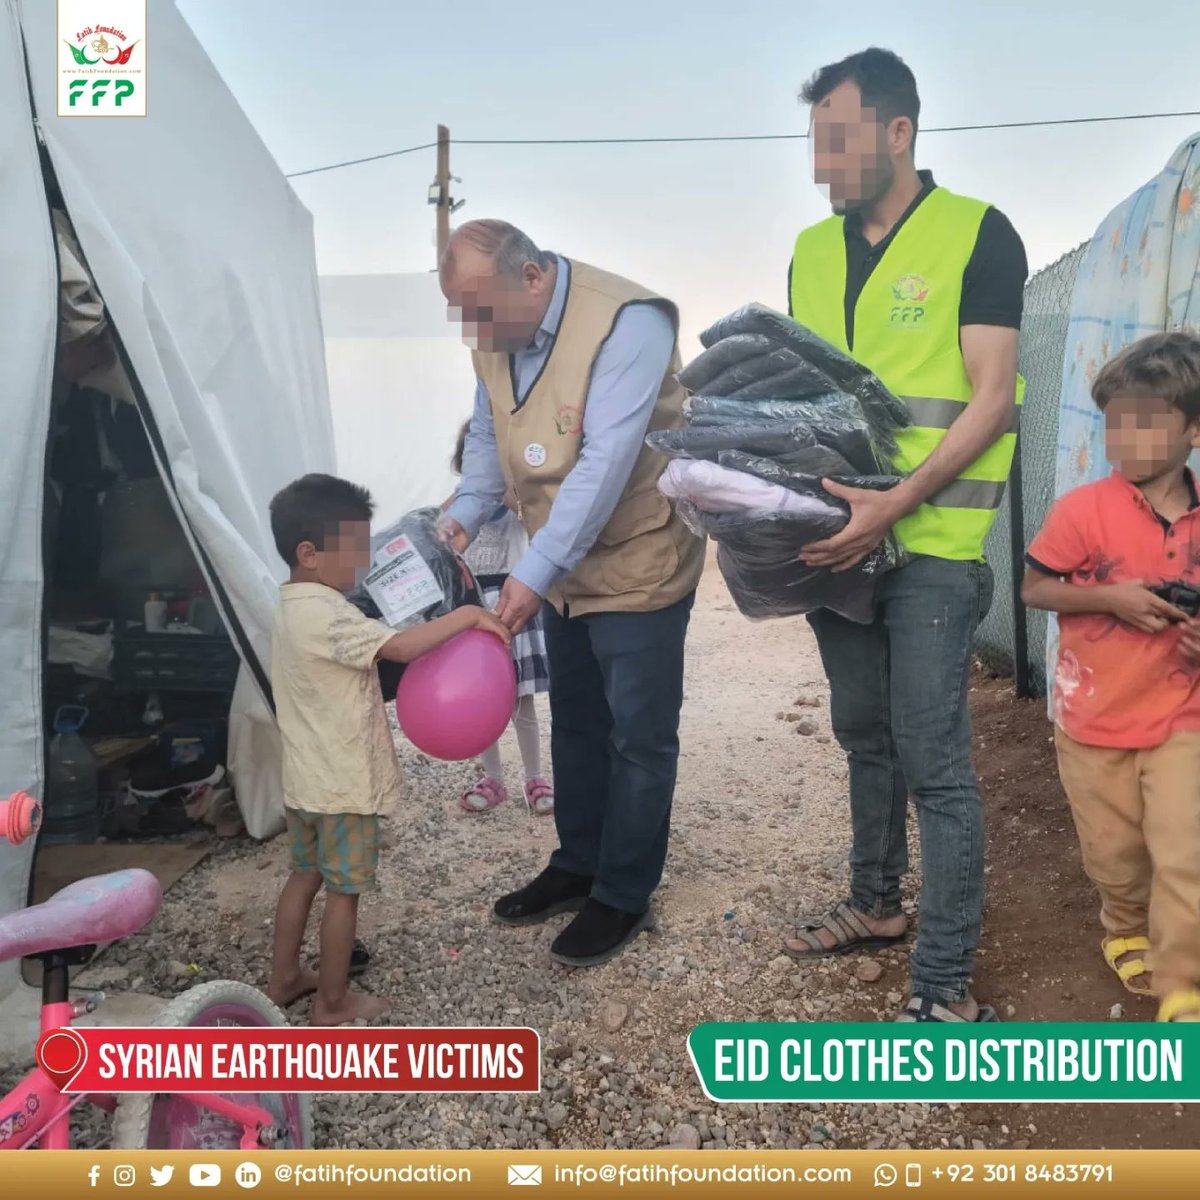 With your support, Fatih Foundation distributed Eid Clothes among Syrian Earthquake Victims

Donate Online: fatihfoundation.com/donate

#syria #eidulfitr2023 #eiddistributionhampers #donate #fatihfoundation #pakistan #communityservice